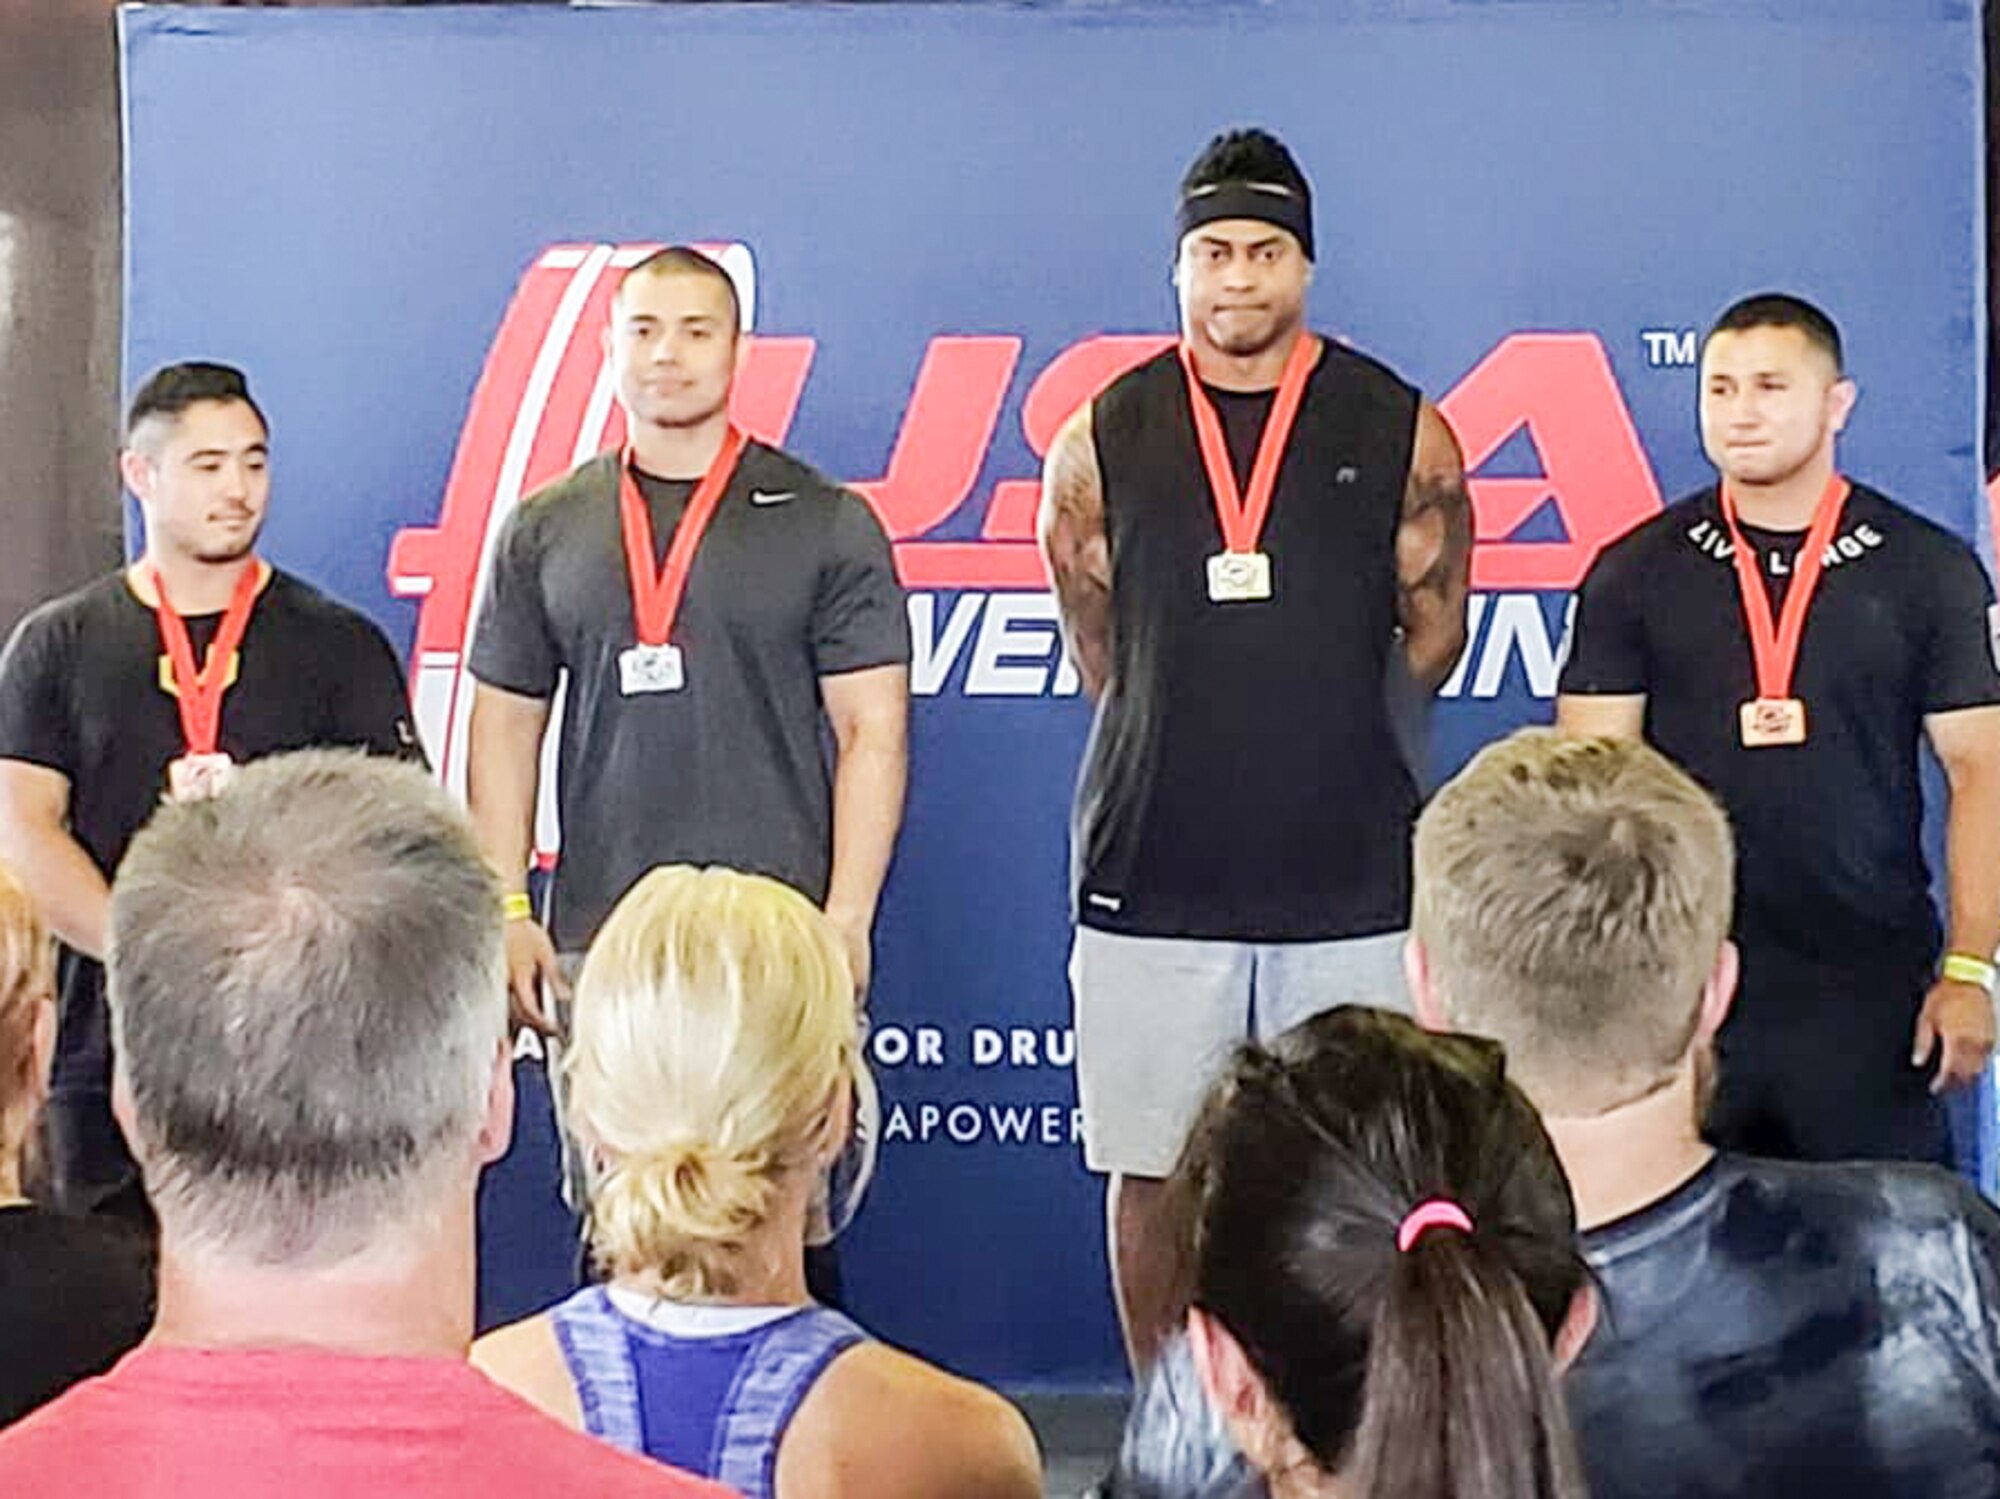 Staff Sgt. Christopher LaCour, second from left, a mission systems technican with the 225th Support Squadron, places second in the 93 kg weight class during the Northwest Regional USA Powerlifting Competition July 29, 2018.   LaCour qualified for Nationals in Spokane, Washington, Oct. 11-15, 2018.